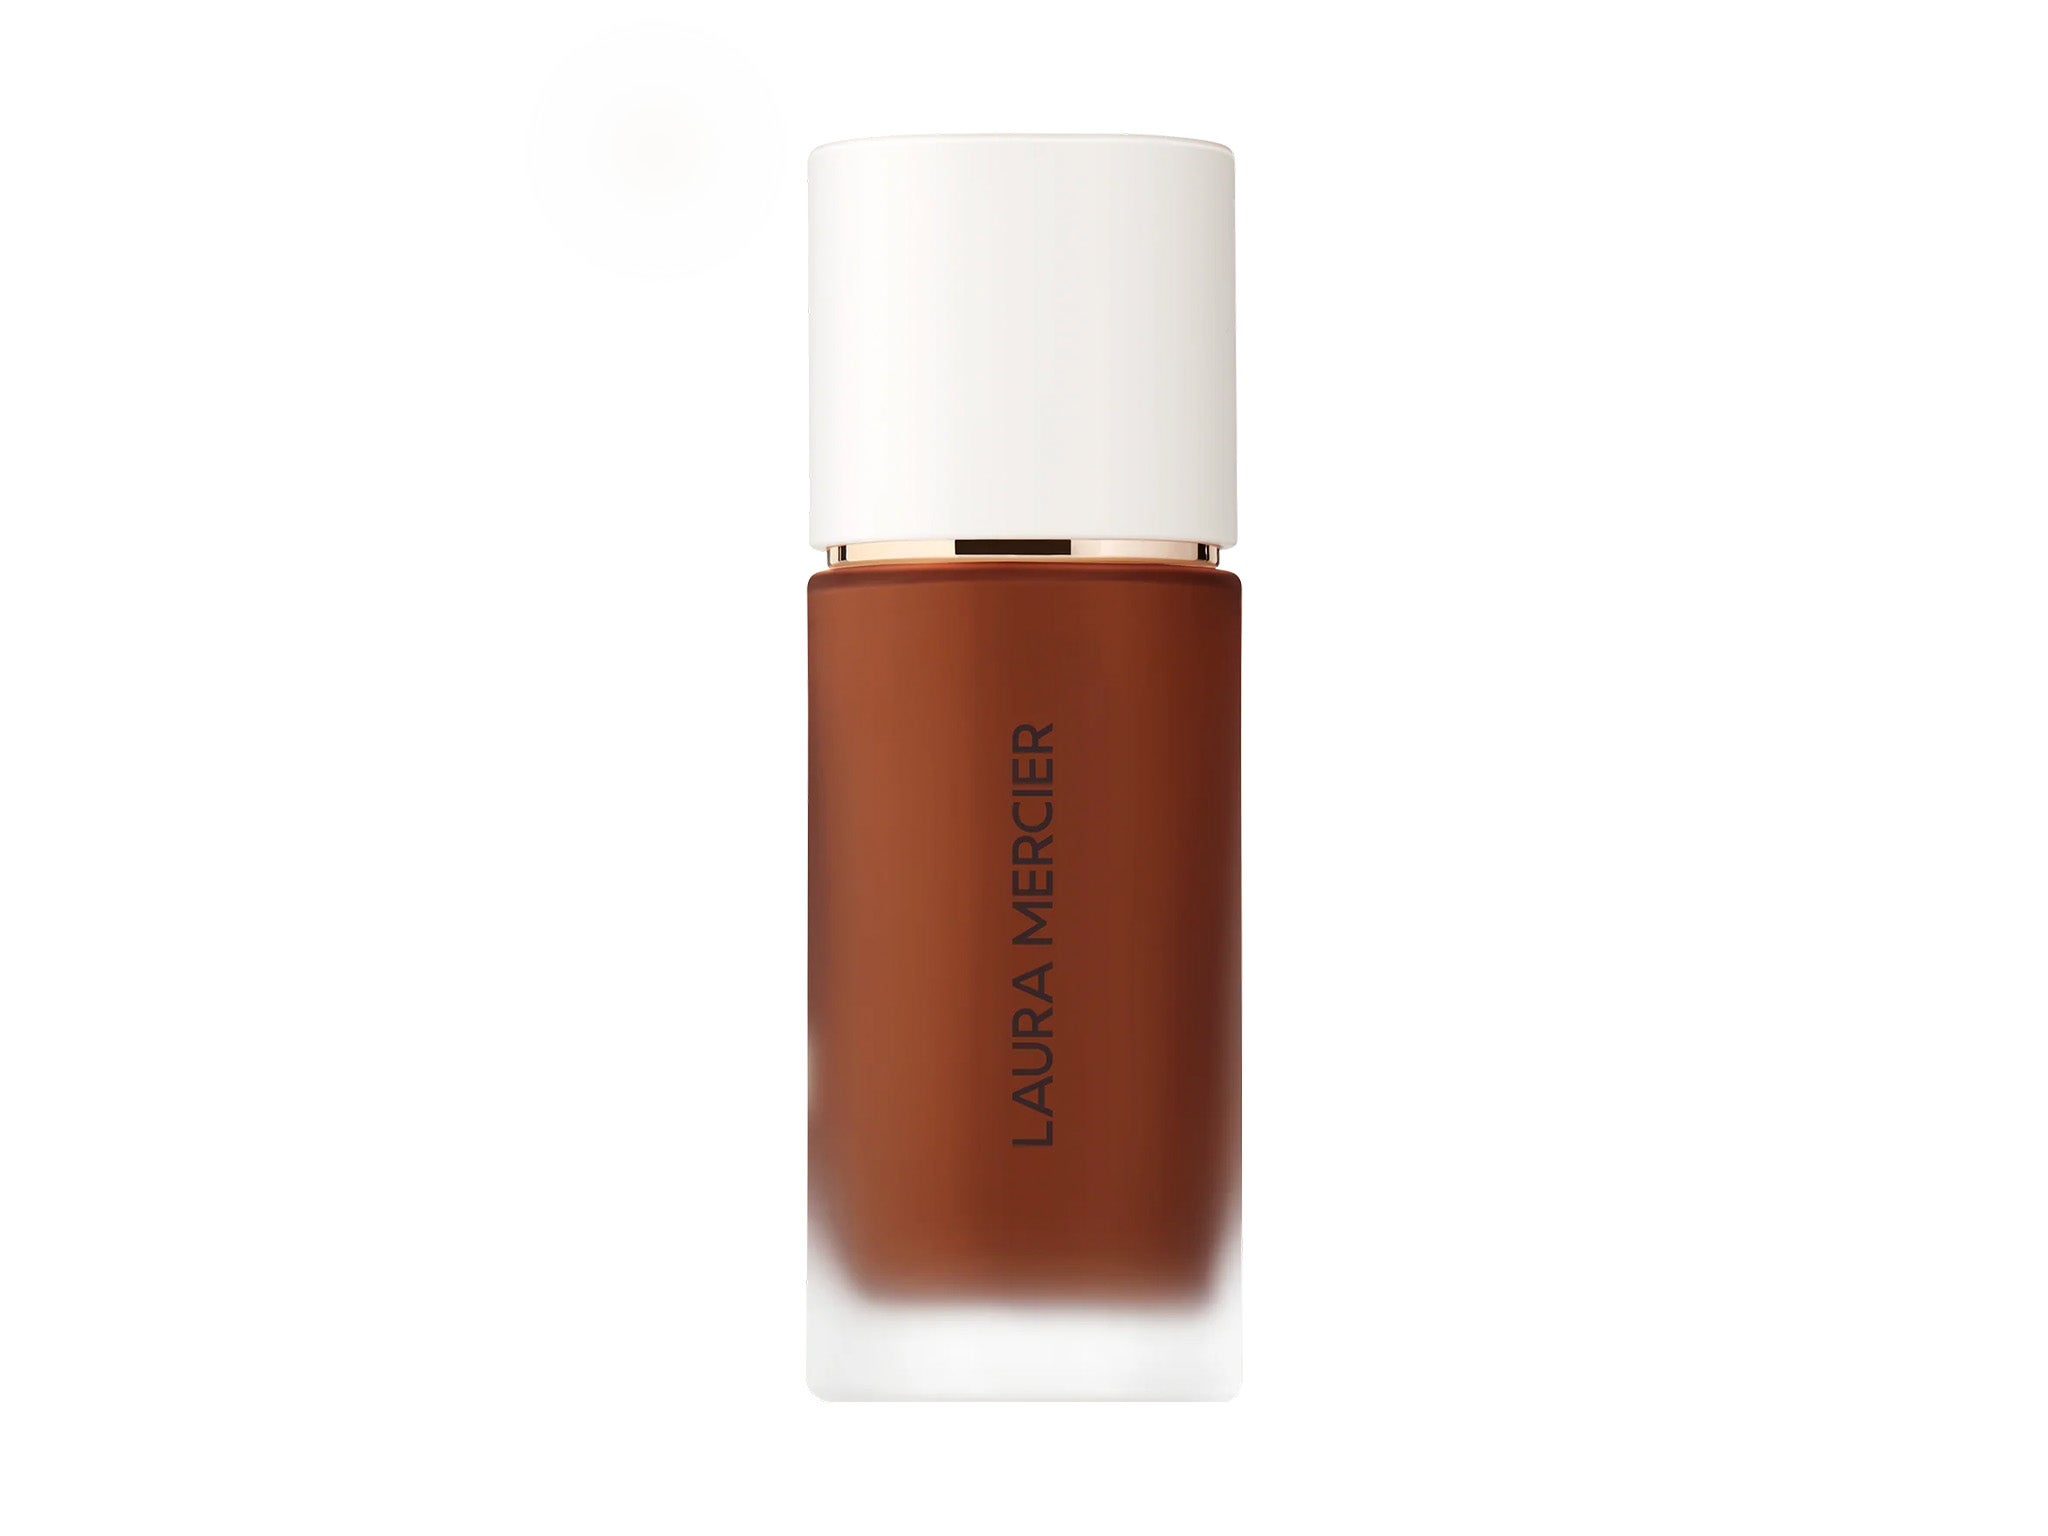 Laura Mercier real flawless weightless perfecting foundation